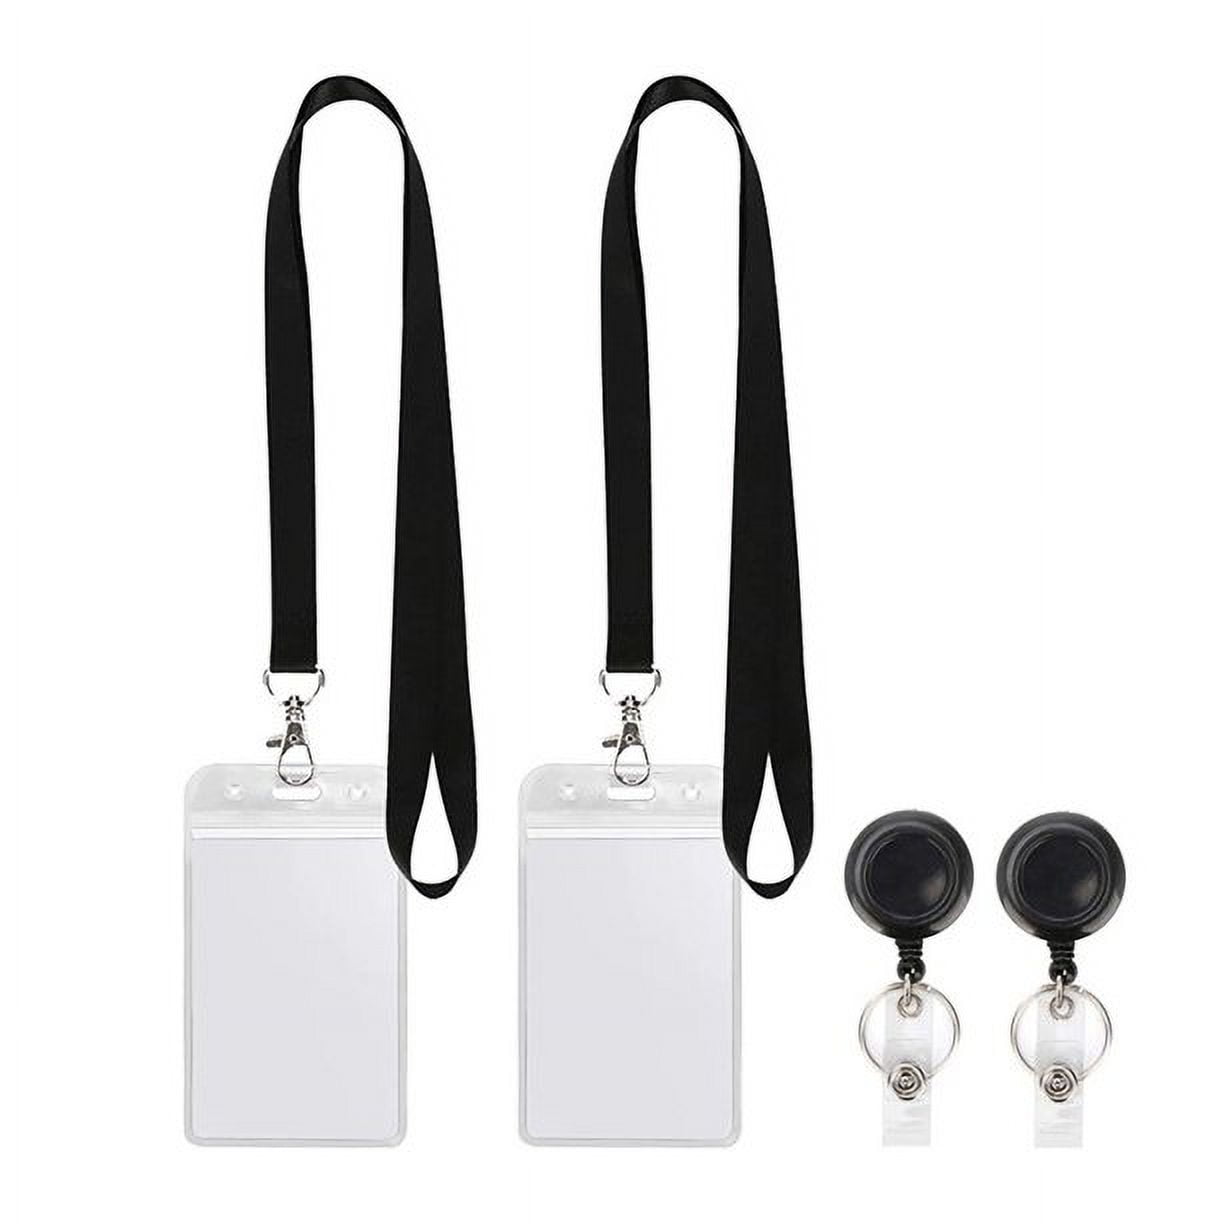 2 Pack Lanyard with id Holders lanyards with Retractable Badge Reel ID  Holder Vertical Cruise Lanyards for id Badges Women Keys Men Ship Card Kids  Breakaway Safety Lanyards 